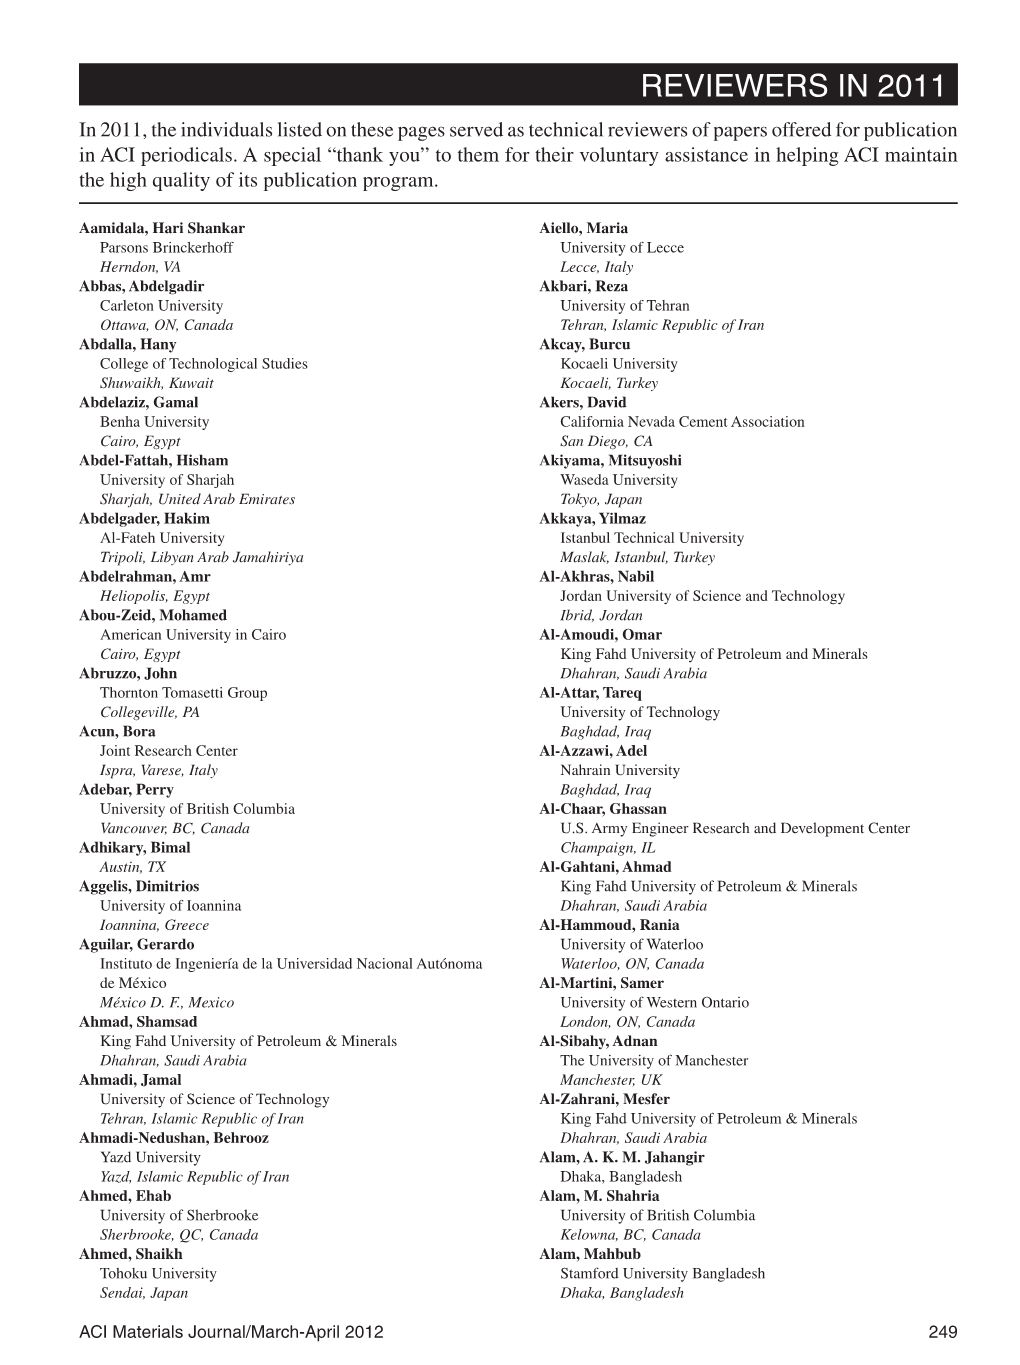 REVIEWERS in 2011 in 2011, the Individuals Listed on These Pages Served As Technical Reviewers of Papers Offered for Publication in ACI Periodicals